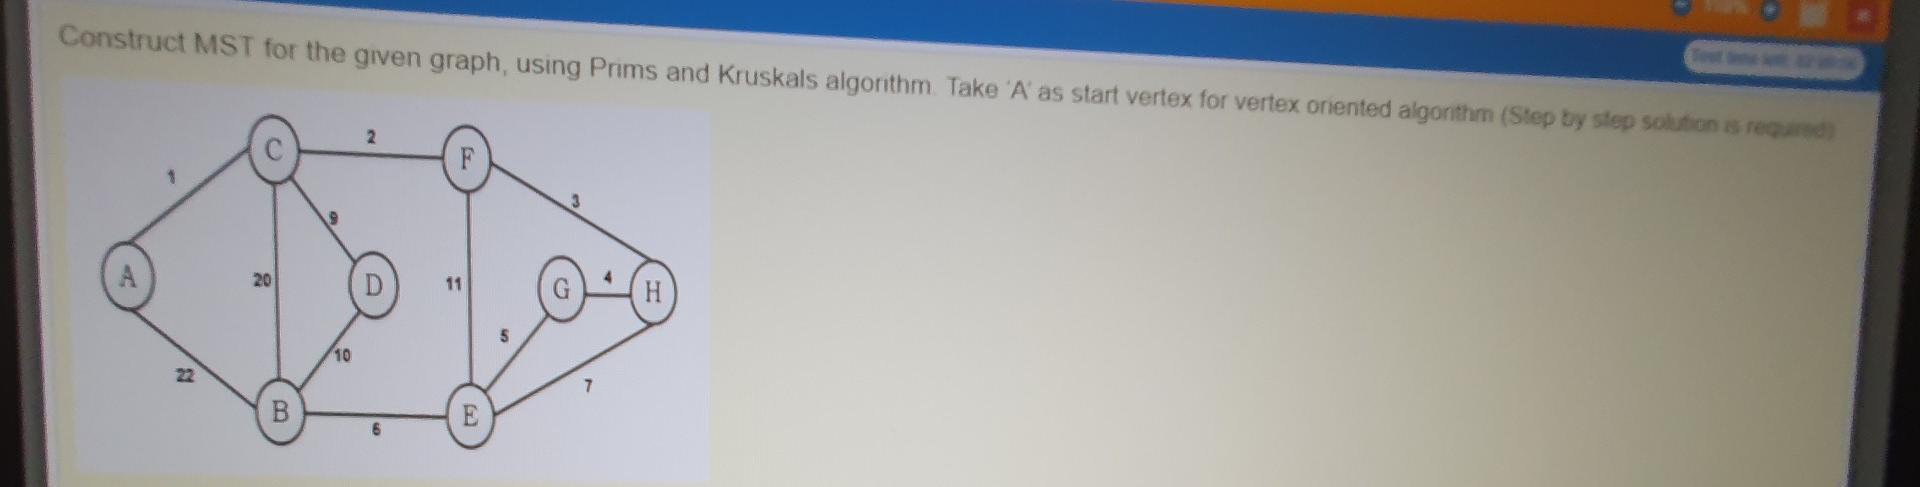 Construct MST for the given graph, using Prims and Kruskals algorithm. Take 'A' as start vertex for vertex